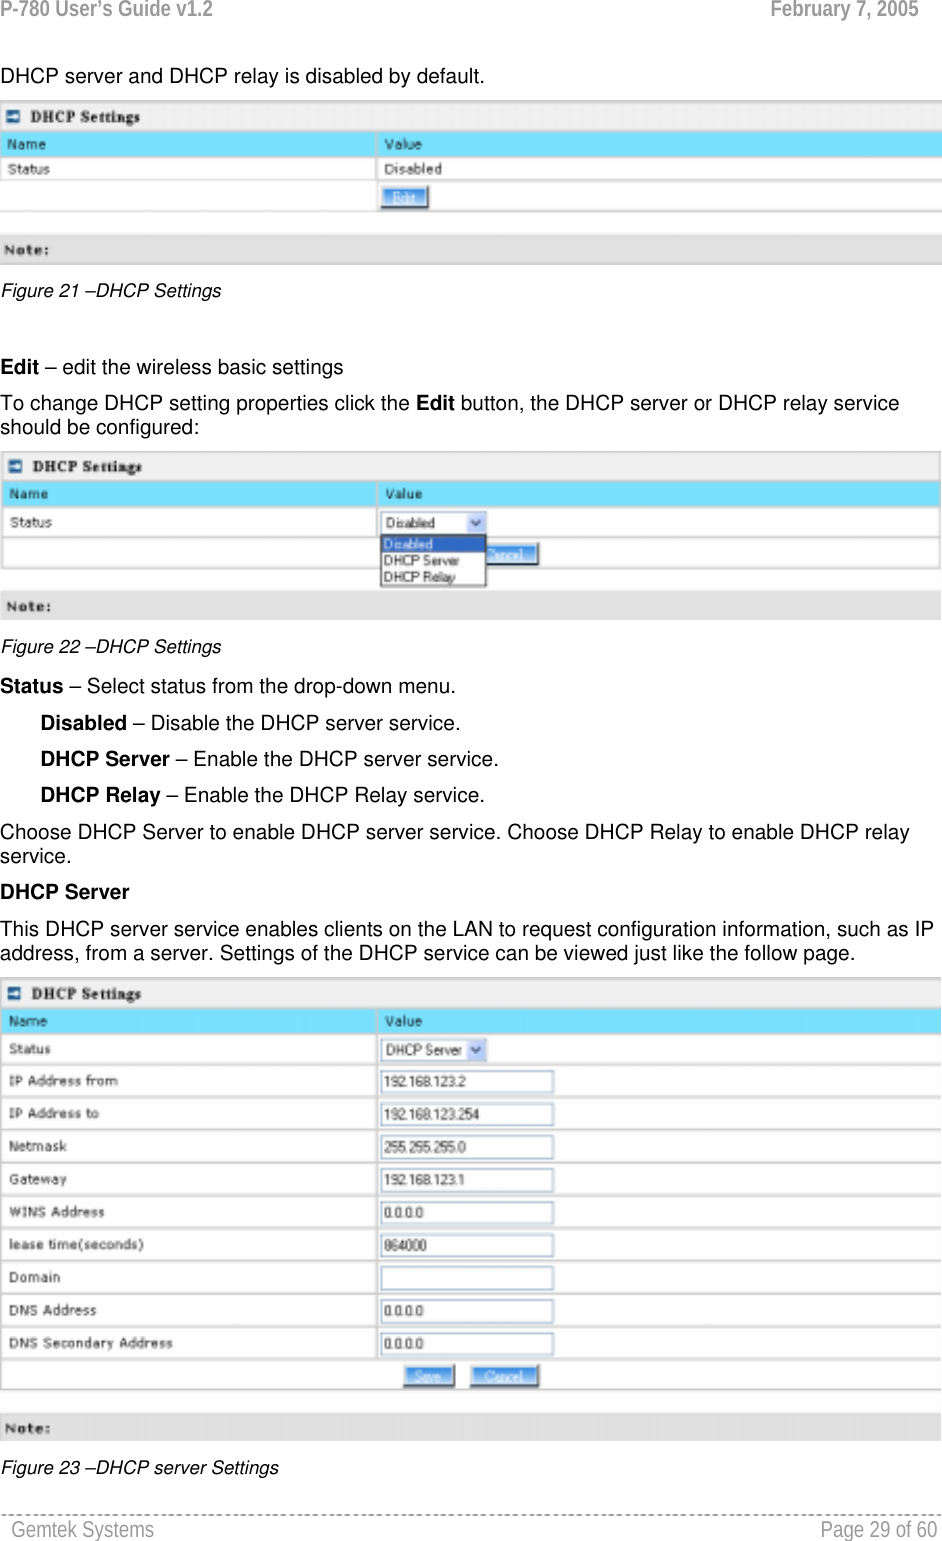 P-780 User’s Guide v1.2  February 7, 2005 Gemtek Systems    Page 29 of 60   DHCP server and DHCP relay is disabled by default.  Figure 21 –DHCP Settings  Edit – edit the wireless basic settings To change DHCP setting properties click the Edit button, the DHCP server or DHCP relay service should be configured:  Figure 22 –DHCP Settings Status – Select status from the drop-down menu.        Disabled – Disable the DHCP server service.        DHCP Server – Enable the DHCP server service.        DHCP Relay – Enable the DHCP Relay service. Choose DHCP Server to enable DHCP server service. Choose DHCP Relay to enable DHCP relay service. DHCP Server This DHCP server service enables clients on the LAN to request configuration information, such as IP address, from a server. Settings of the DHCP service can be viewed just like the follow page.  Figure 23 –DHCP server Settings 